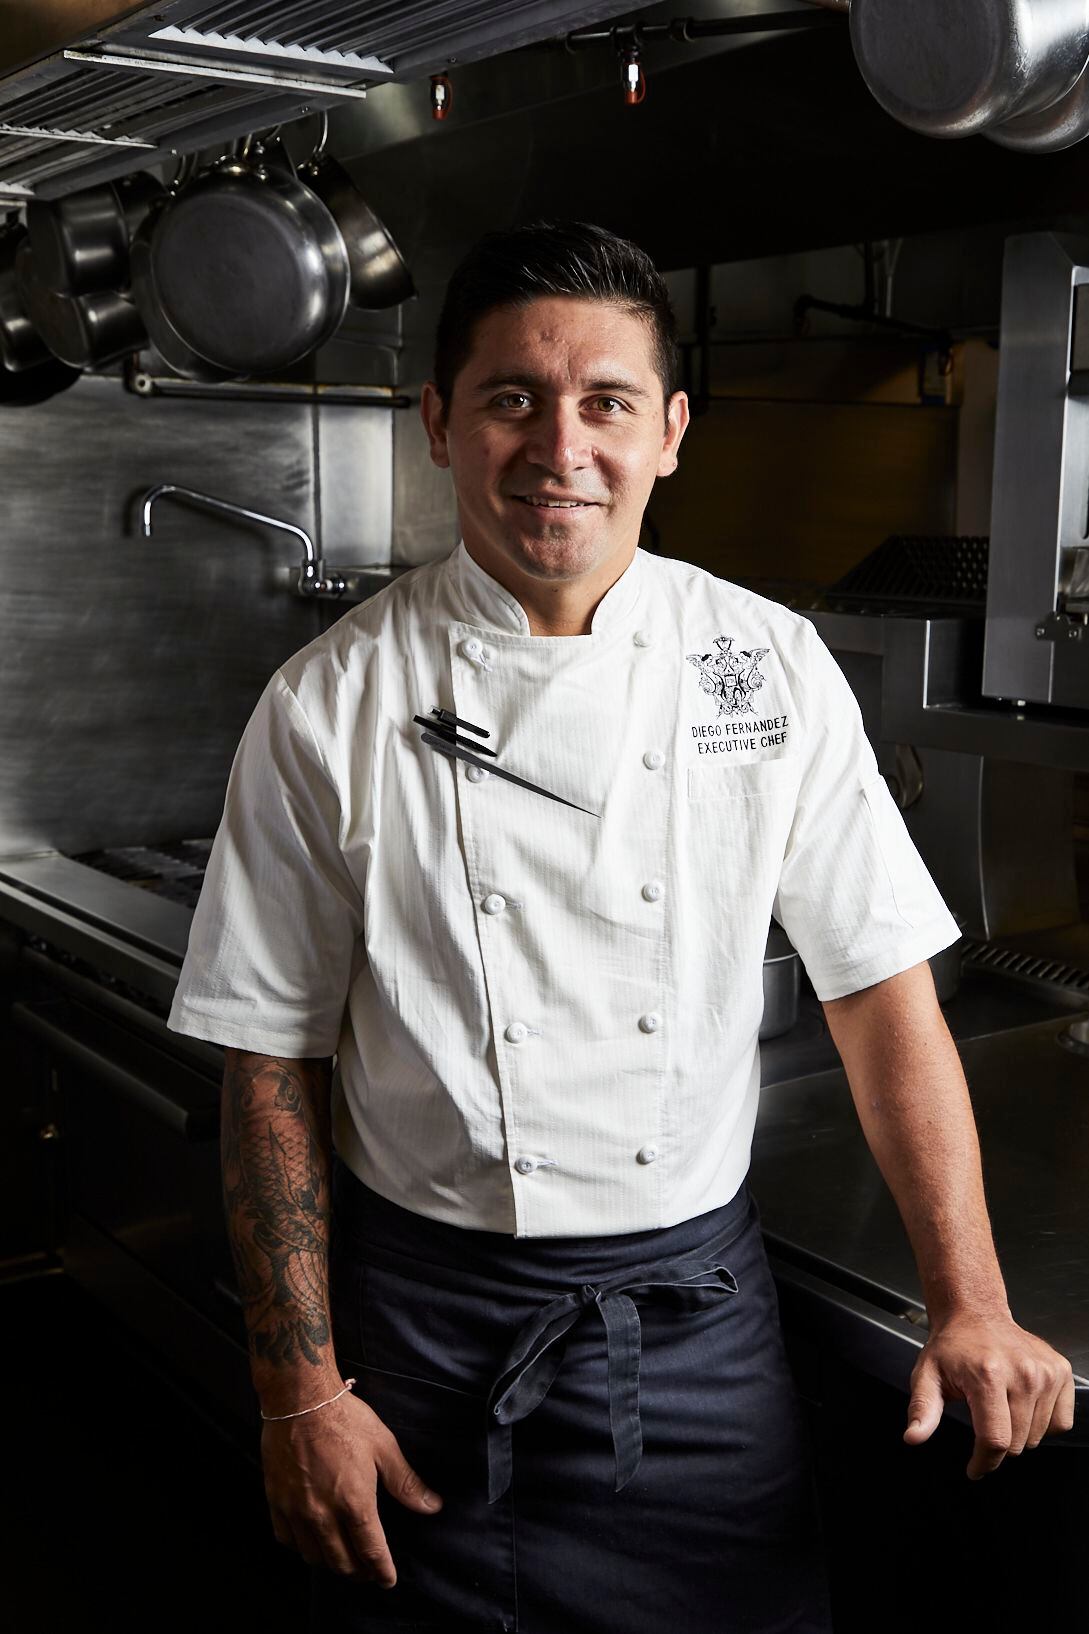 Diego Fernandez has been named executive chef at the French Room in the Adolphus Hotel.